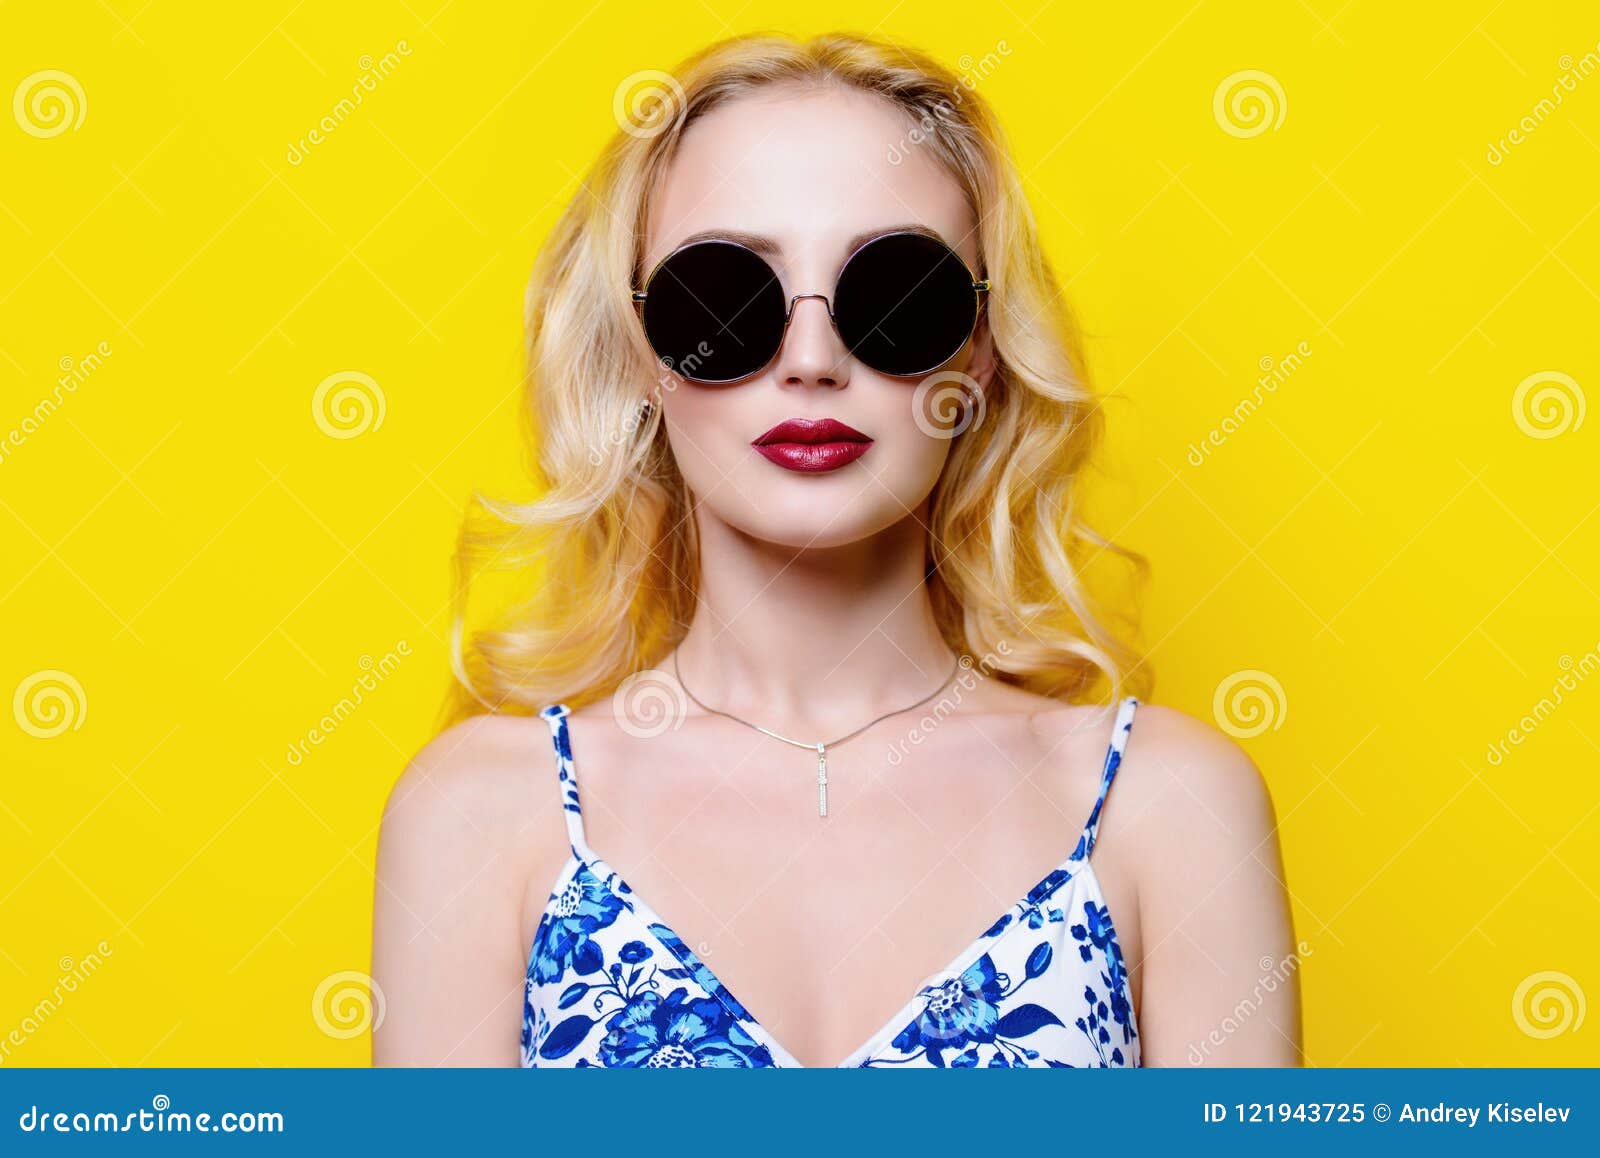 Glasses from the sun stock image. Image of model, natural - 121943725